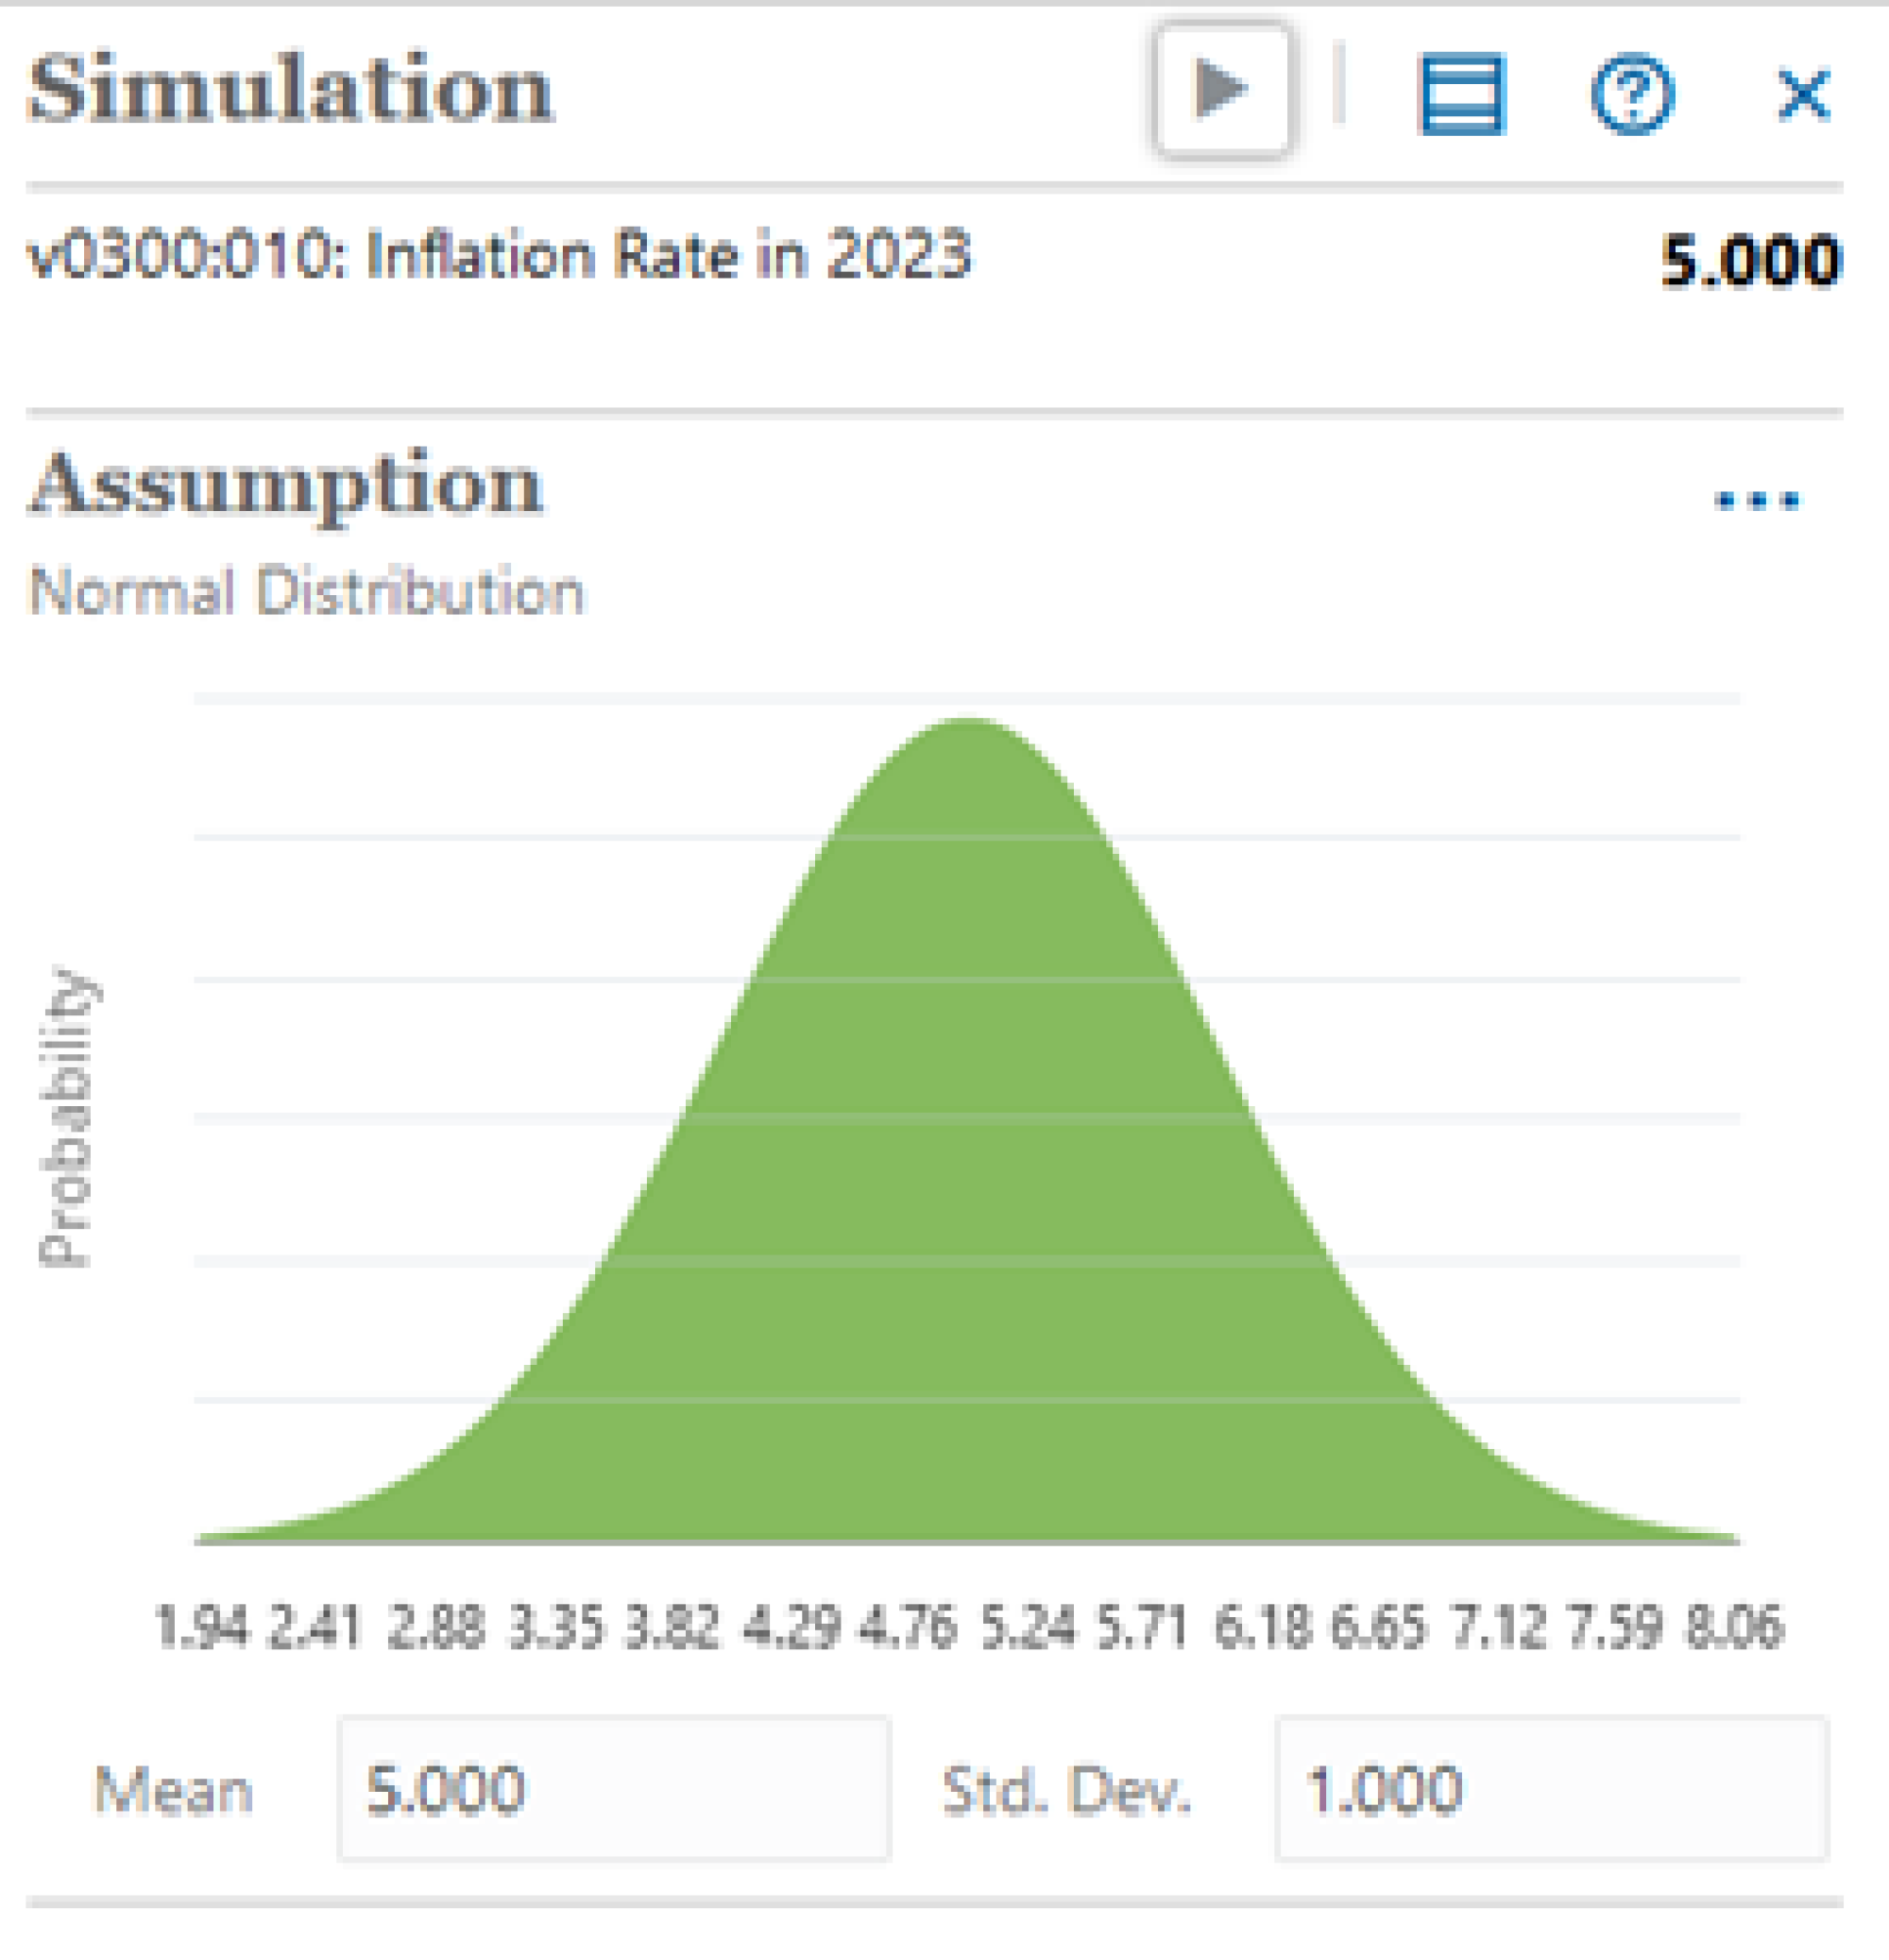 Monte Carlo simulation with bell curve - inflation rate